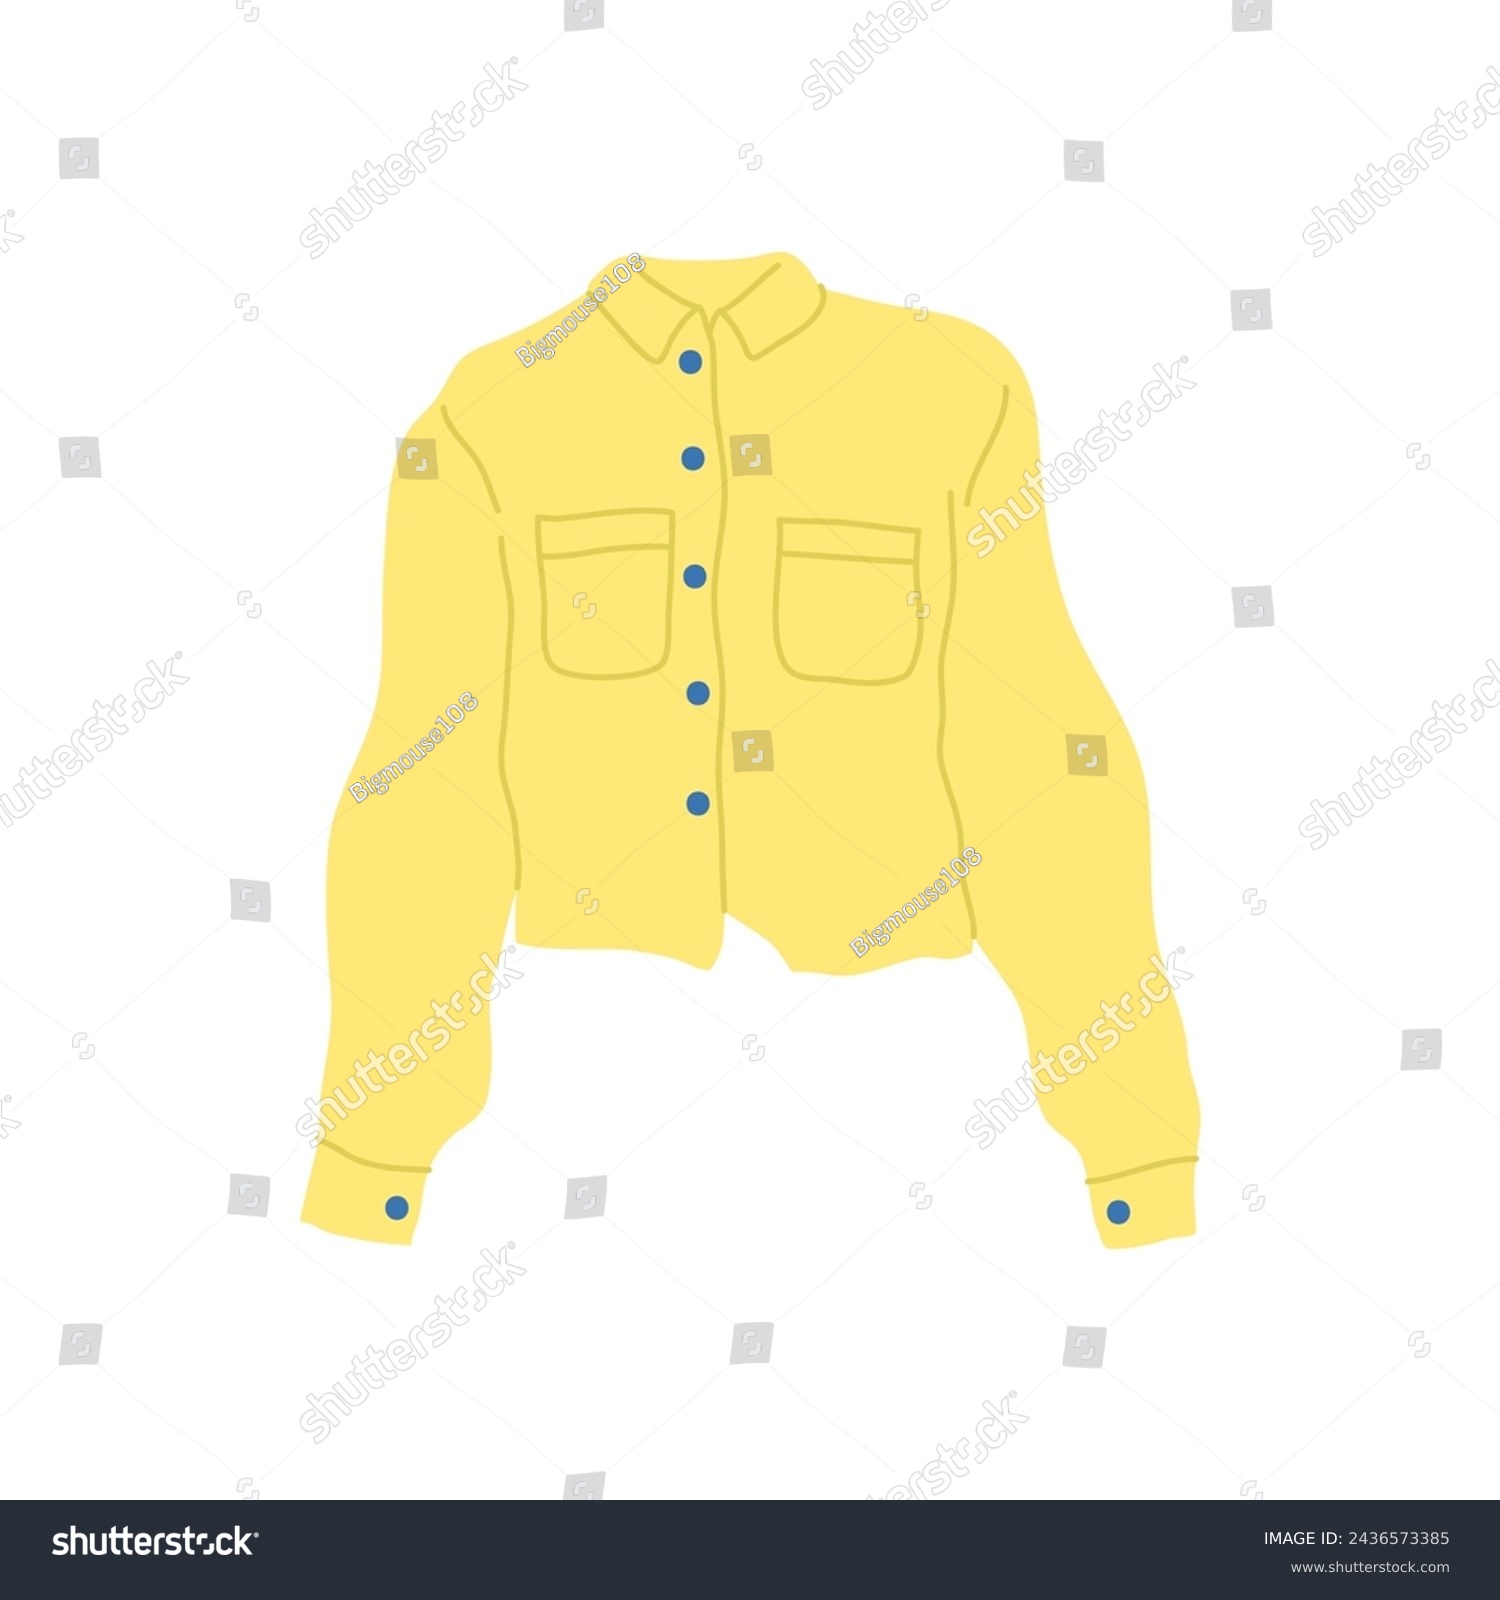 SVG of Cartoon Clothe Female Yellow Jacket Concept Flat Design Style Isolated on a White Background. Vector illustration svg